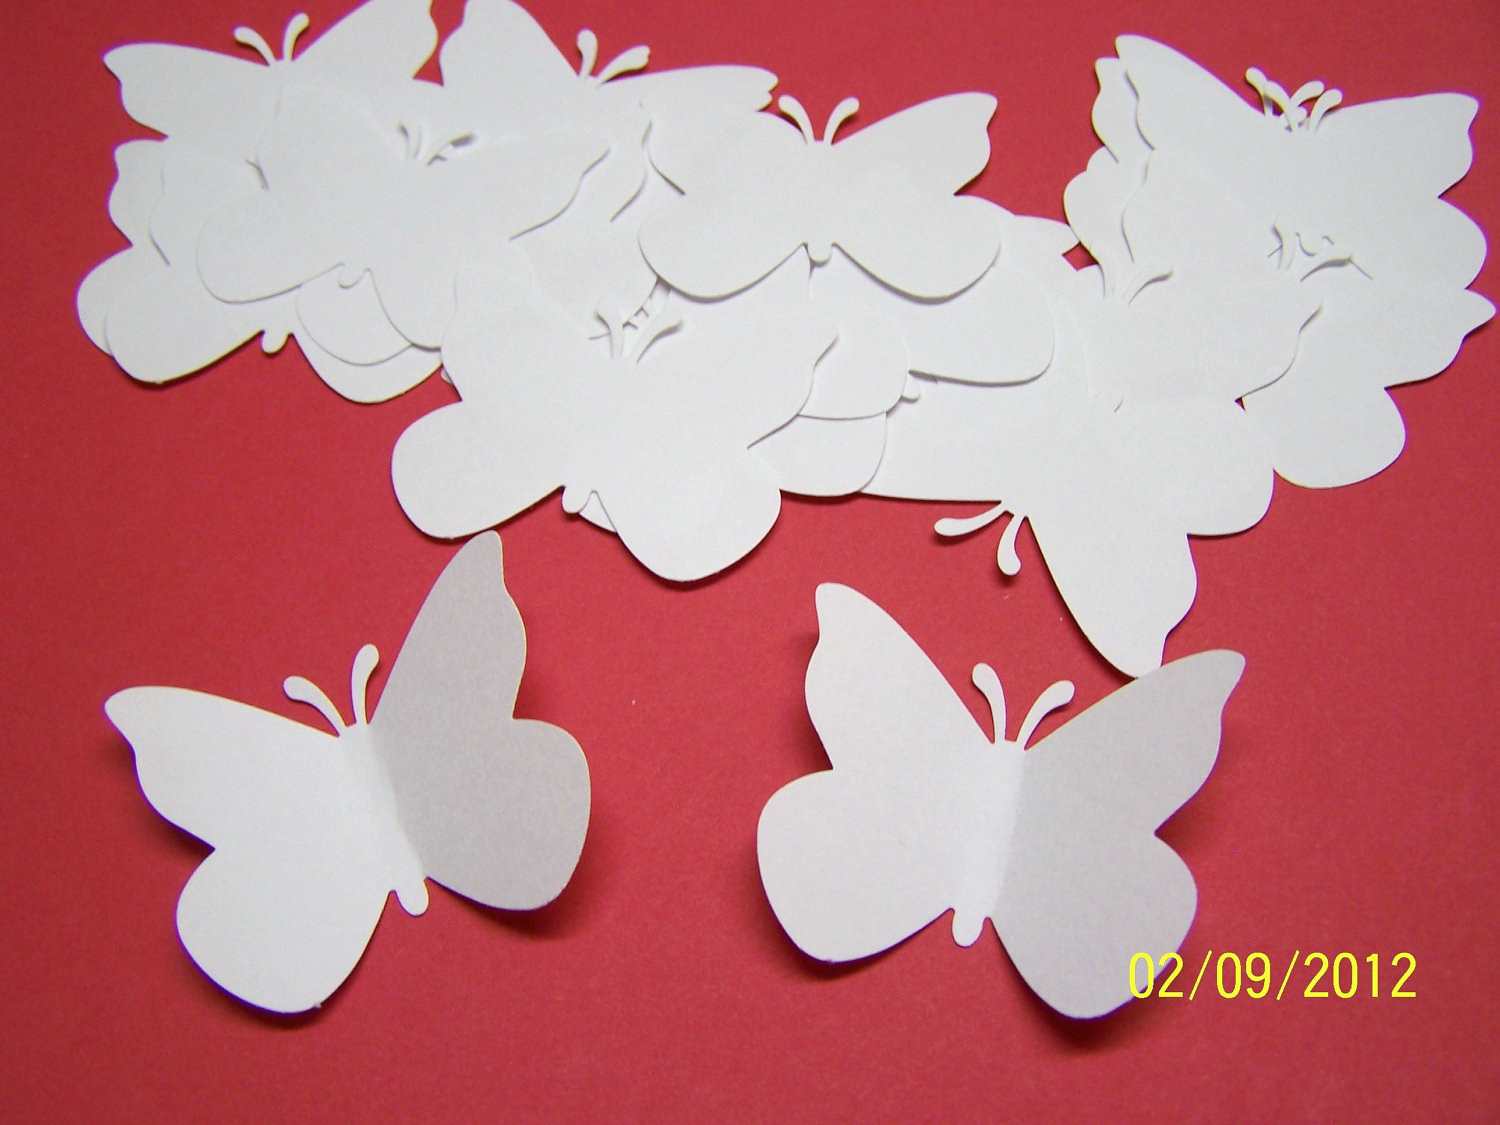 Popular items for butterfly cut outs on Etsy